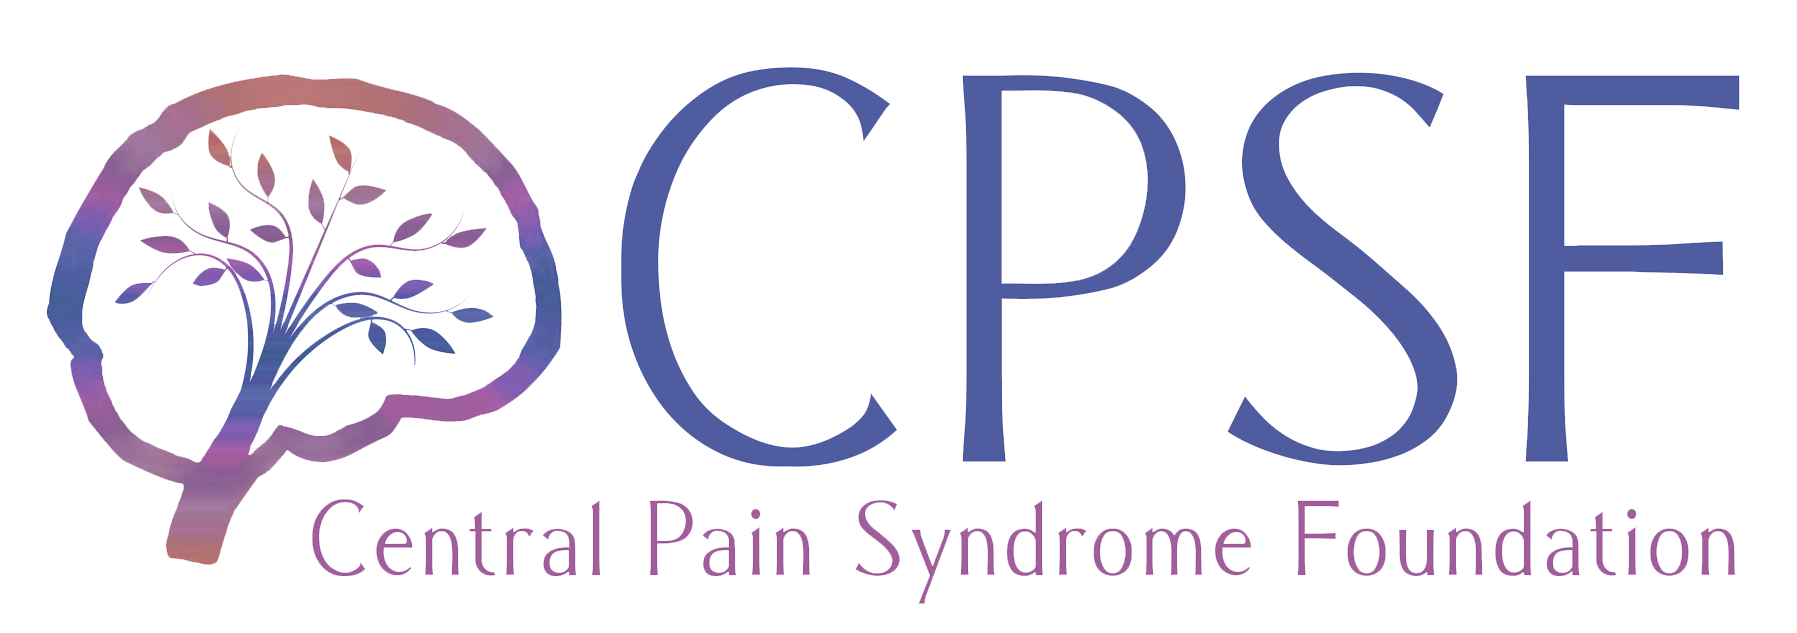 CPSF | Central Pain Syndrome Foundation